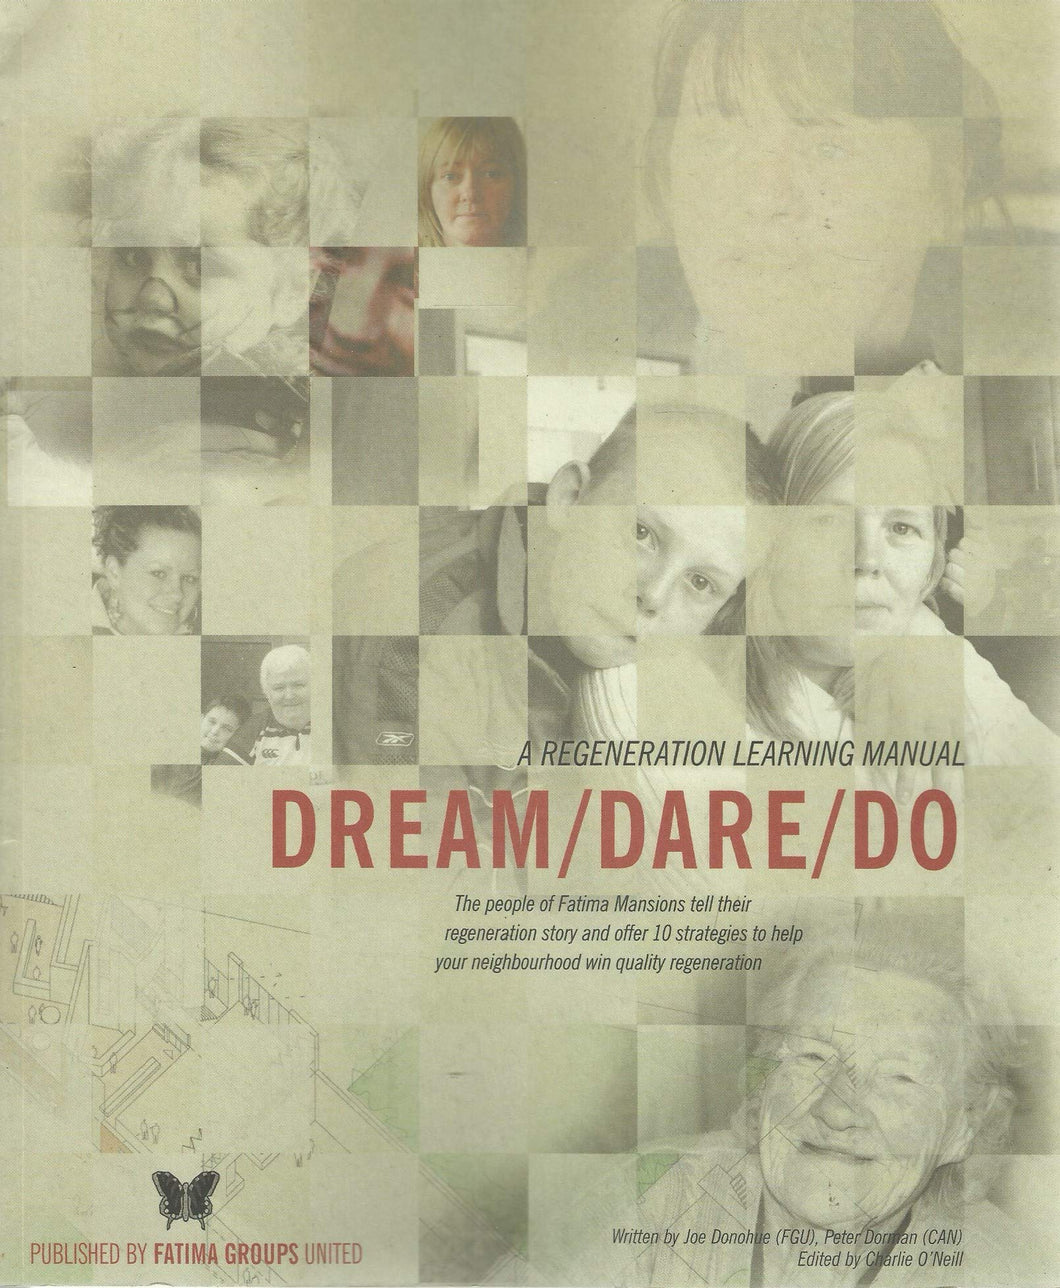 Dream/Dare/Do: A Regeneration Learning Manual - The People of Fatima Mansions Tell Their Regeneration Story and Offer 10 Strategies to Help Your Neighbourhood Win Quality Regeneration